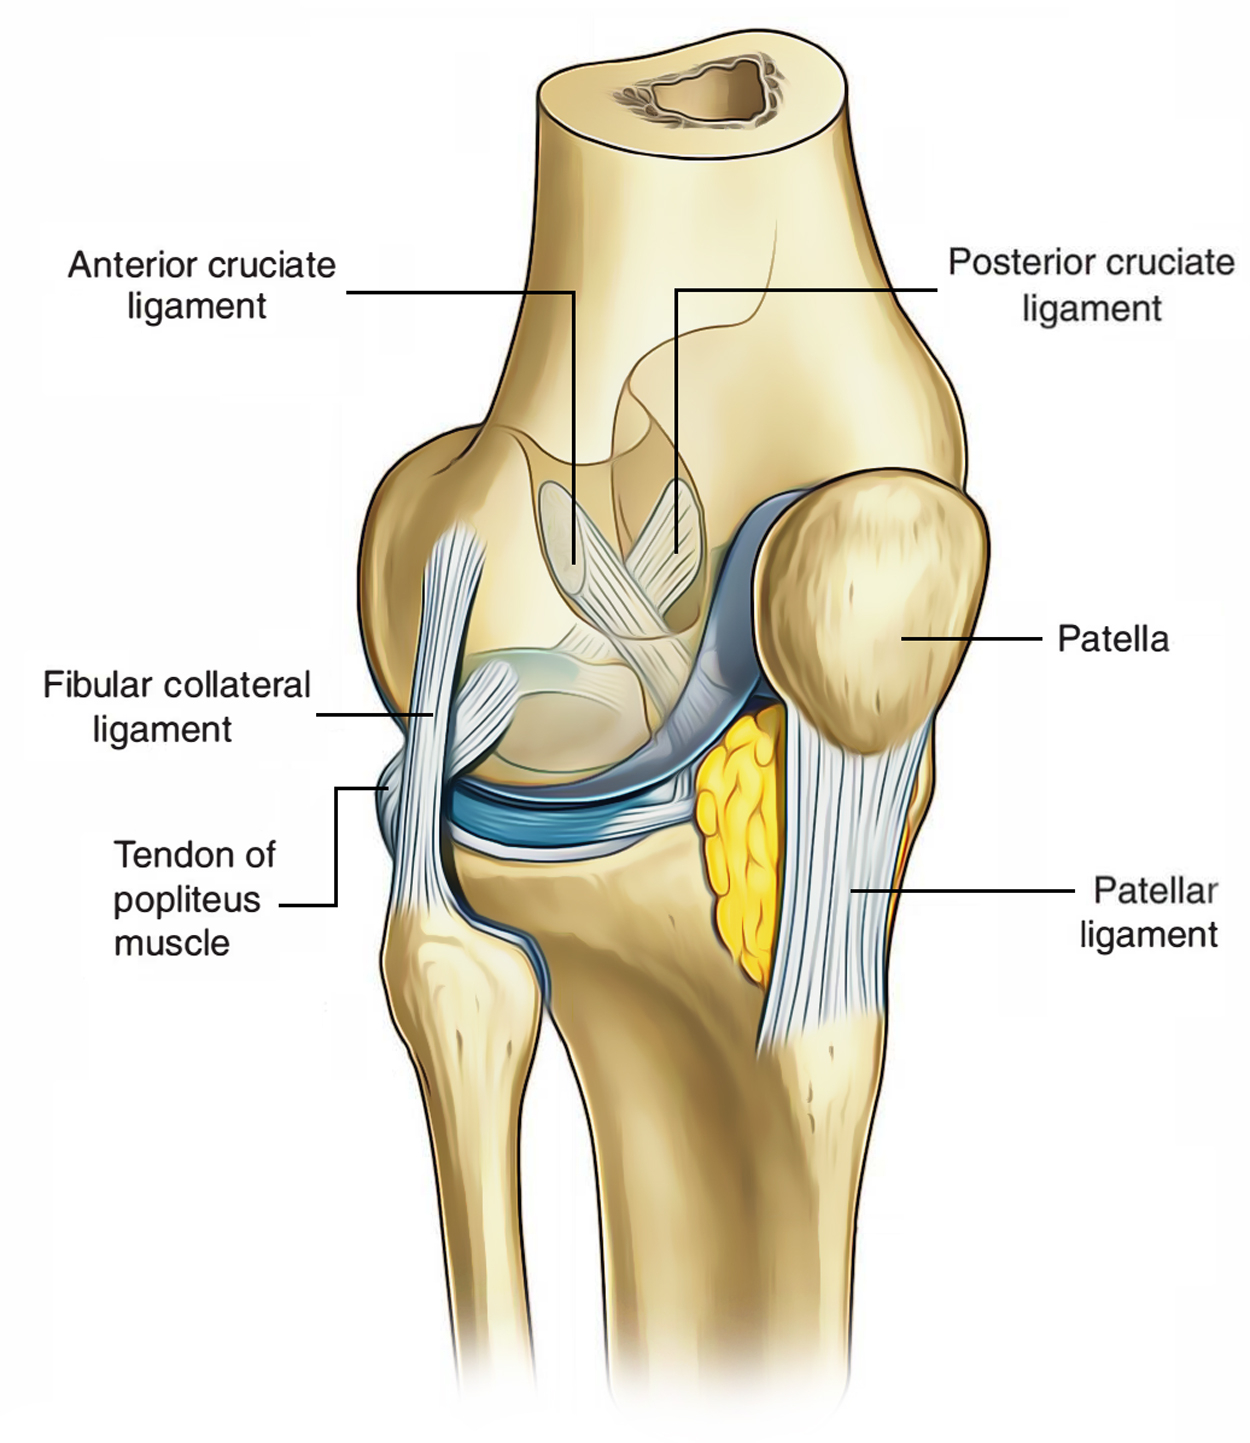 Diagram Of Knee Easy Notes On Ligaments Of The Knee Jointlearn In Just 3 Minutes